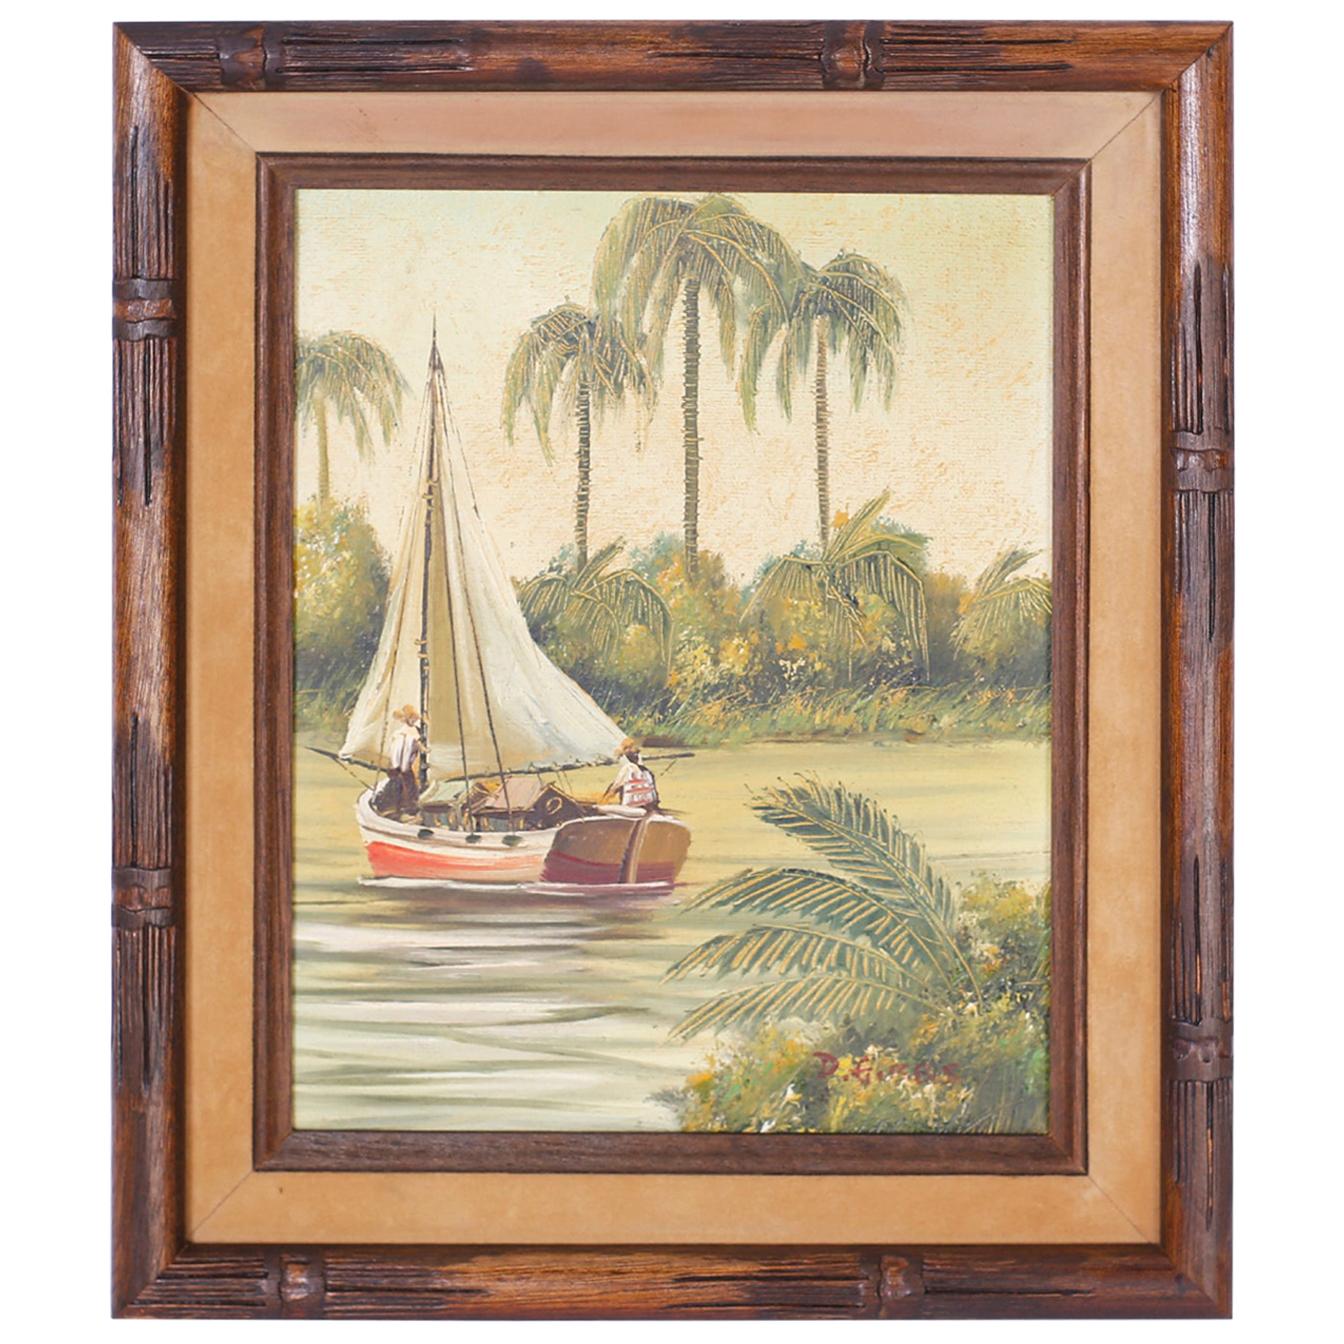 Vintage Oil Painting on Canvas of a Tropical Scene with Sailboat